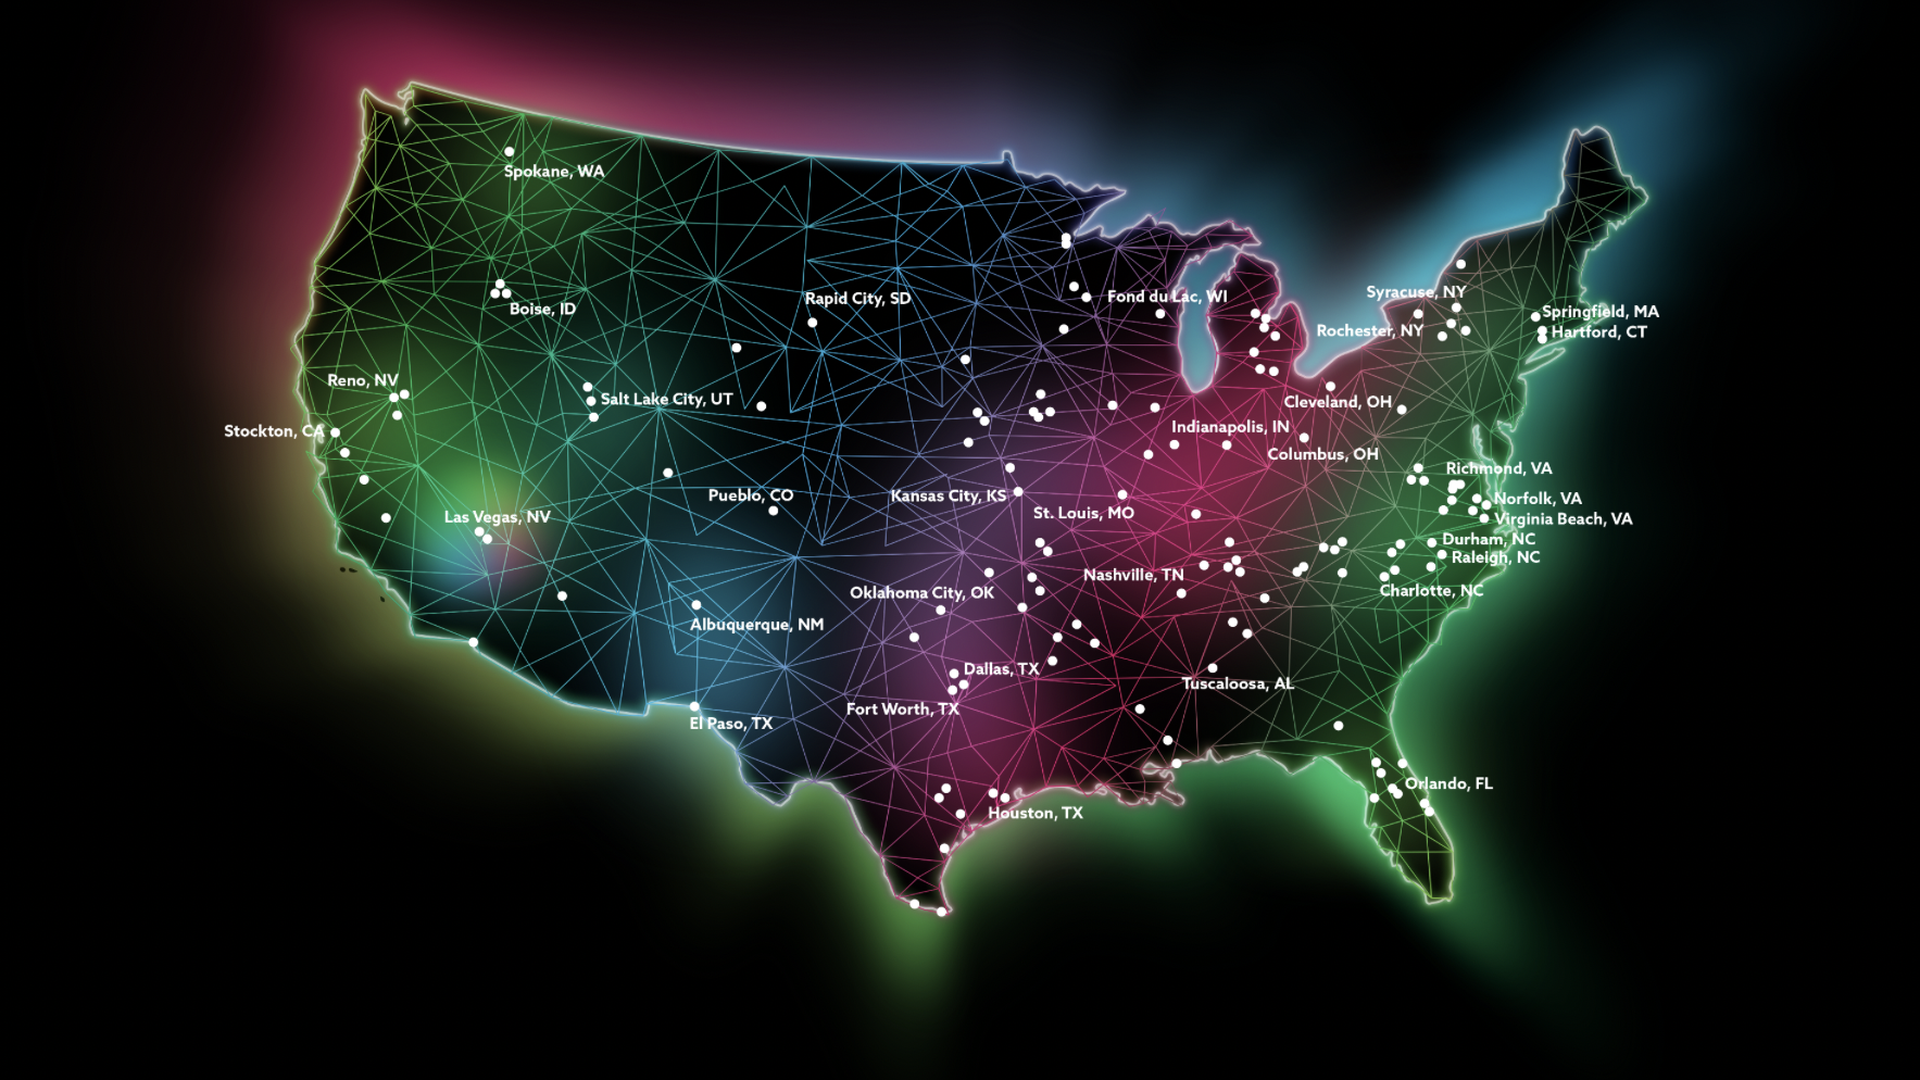 An illustration of a map of the U.S. with cities where Dish plans to offer its homegrown 5G service